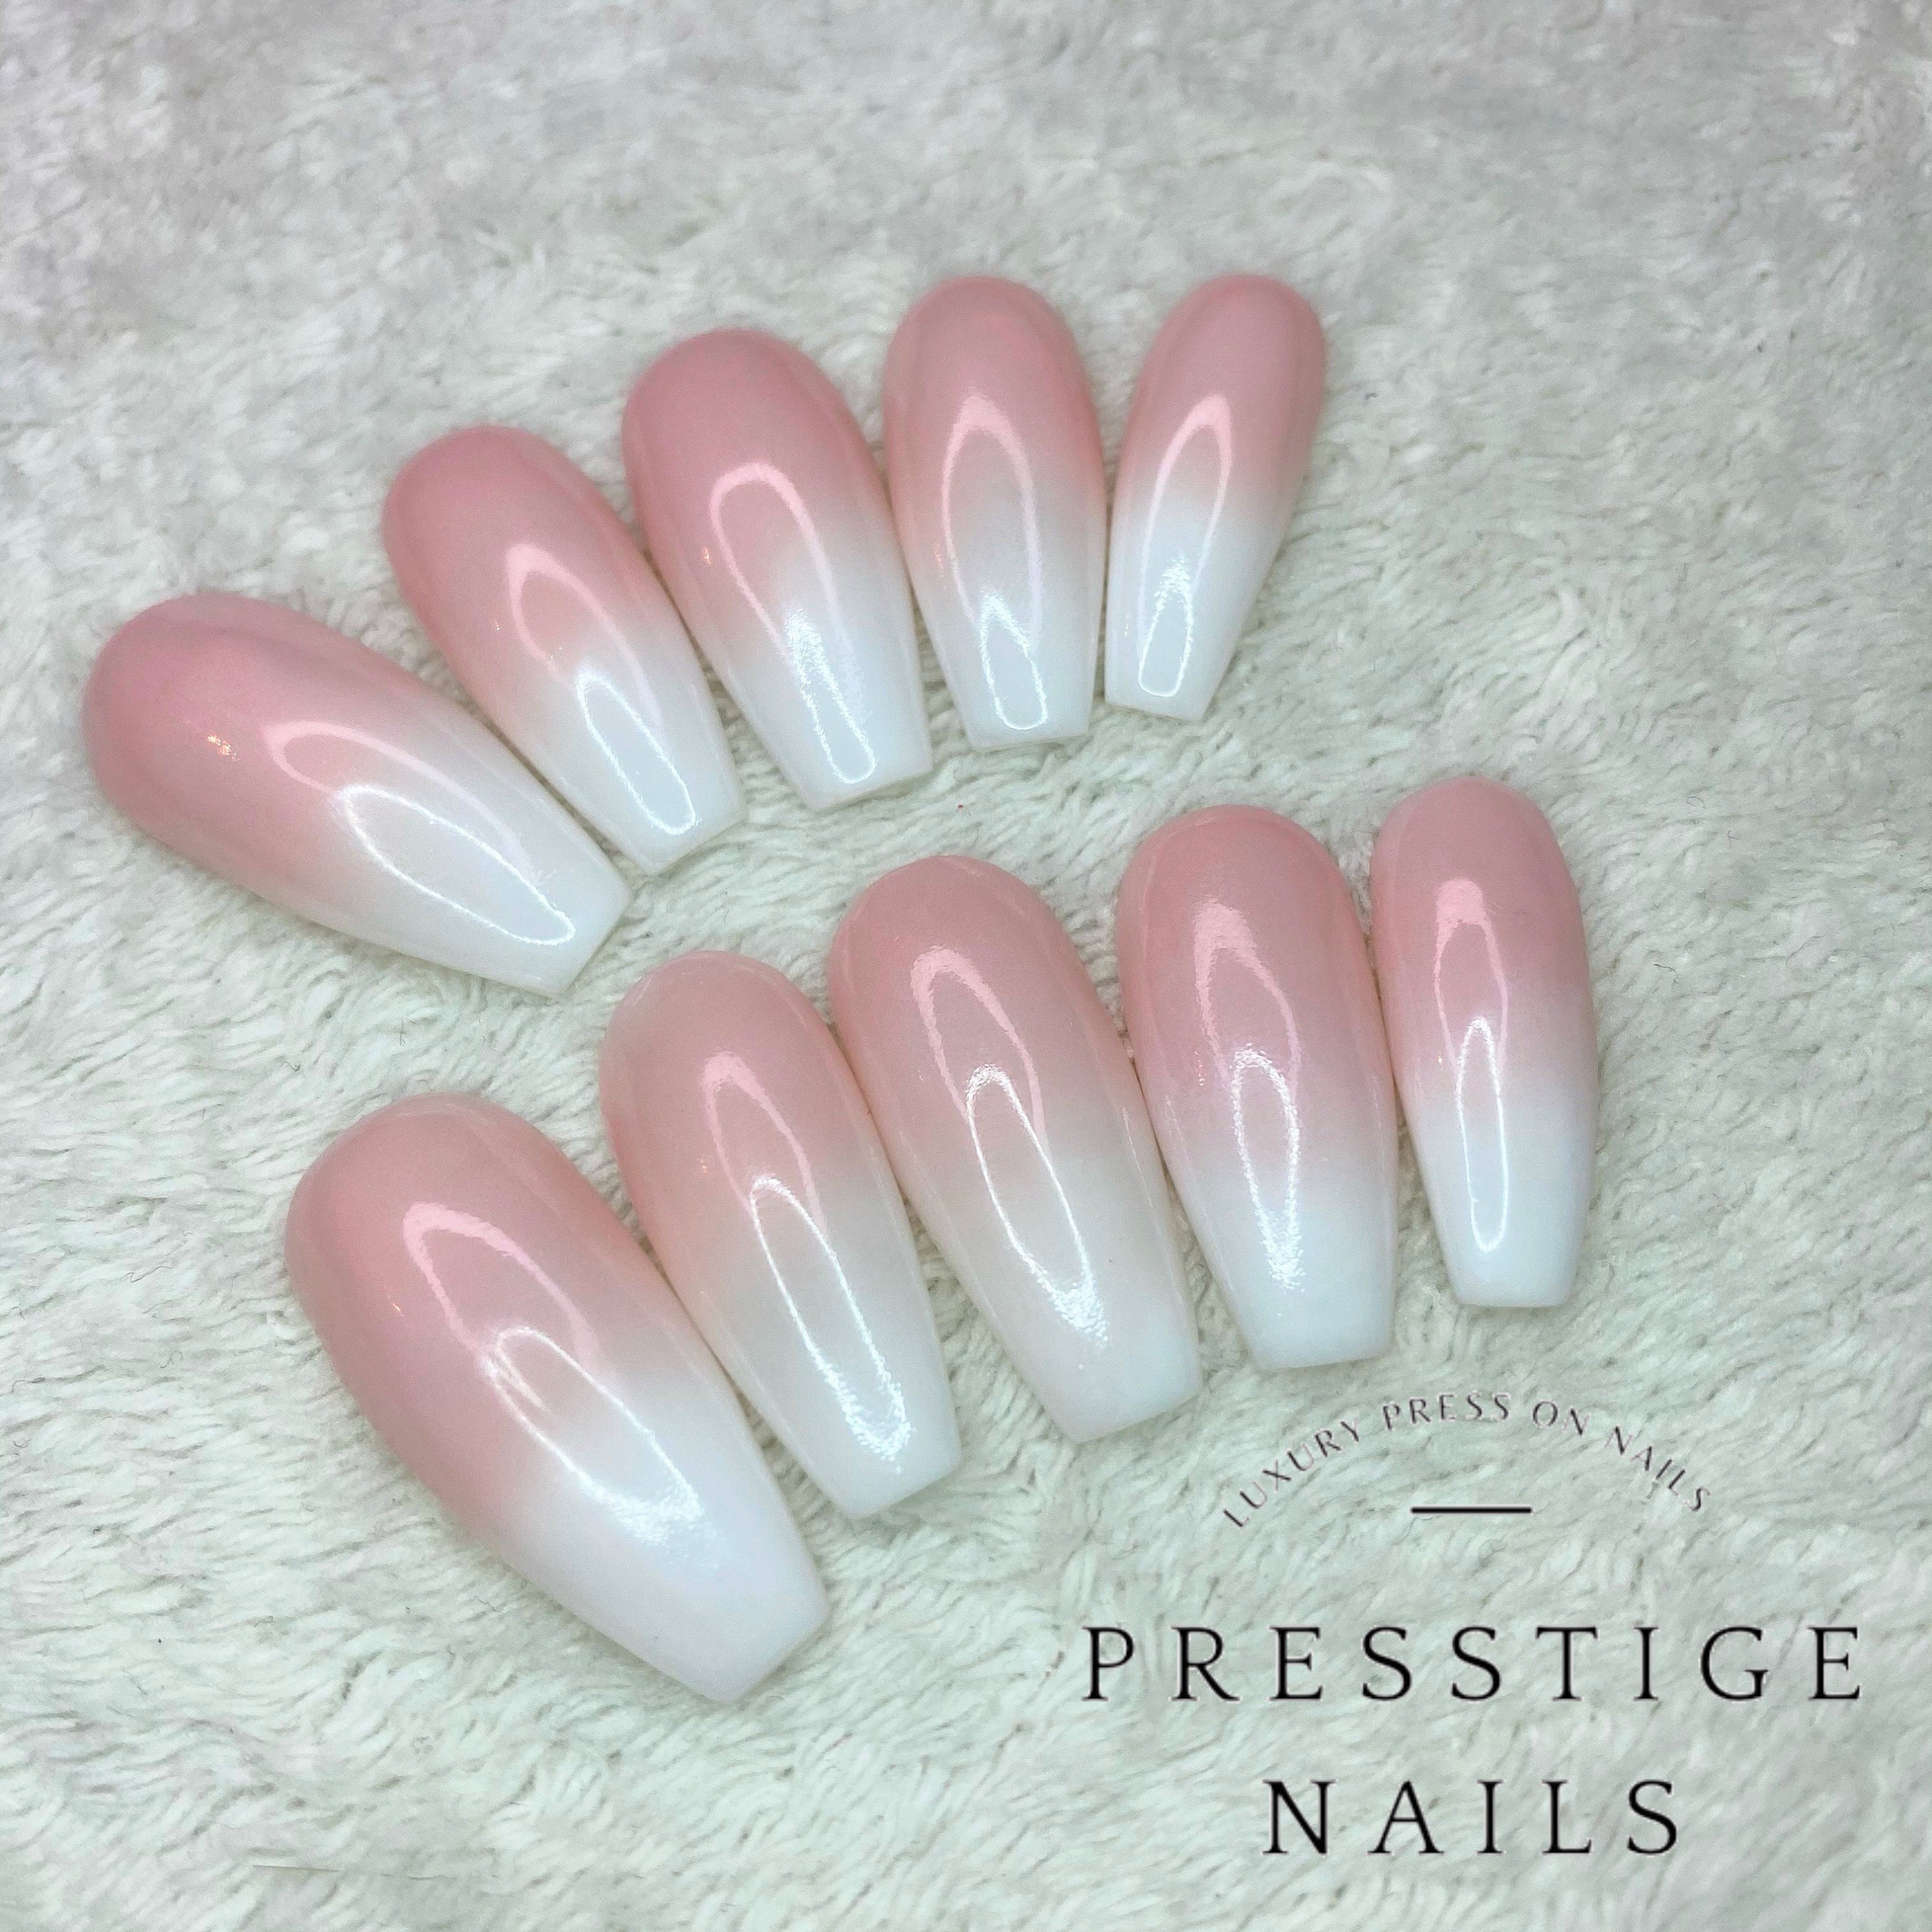 Baby boomer pink and white ombré press on nails | Etsy